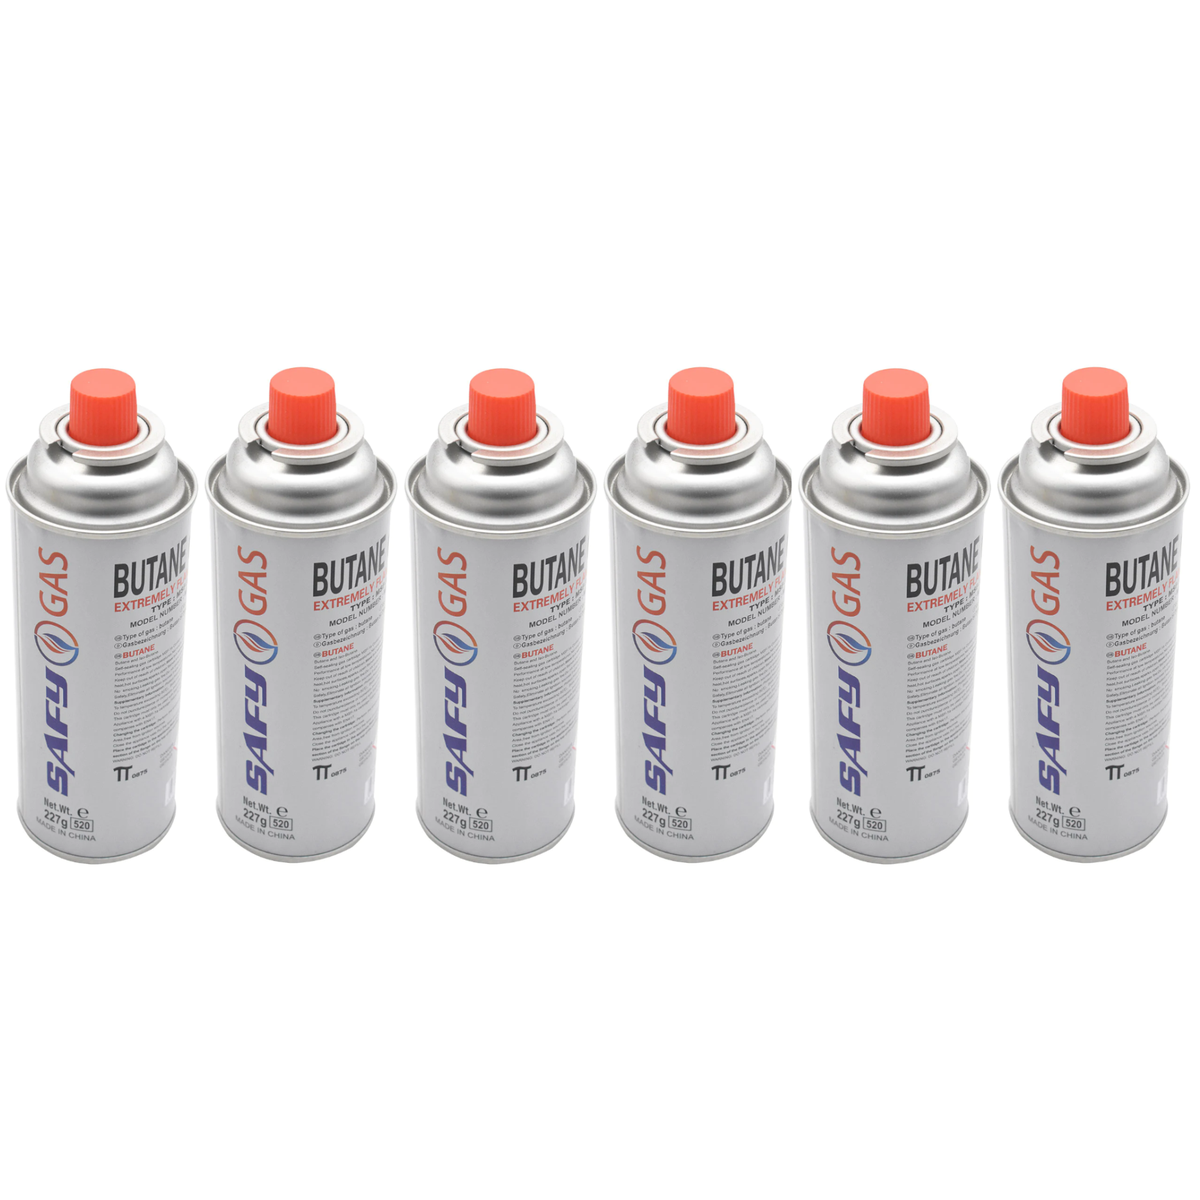 Pack of 6 - SAFY GAS - Butane Canisters 227g